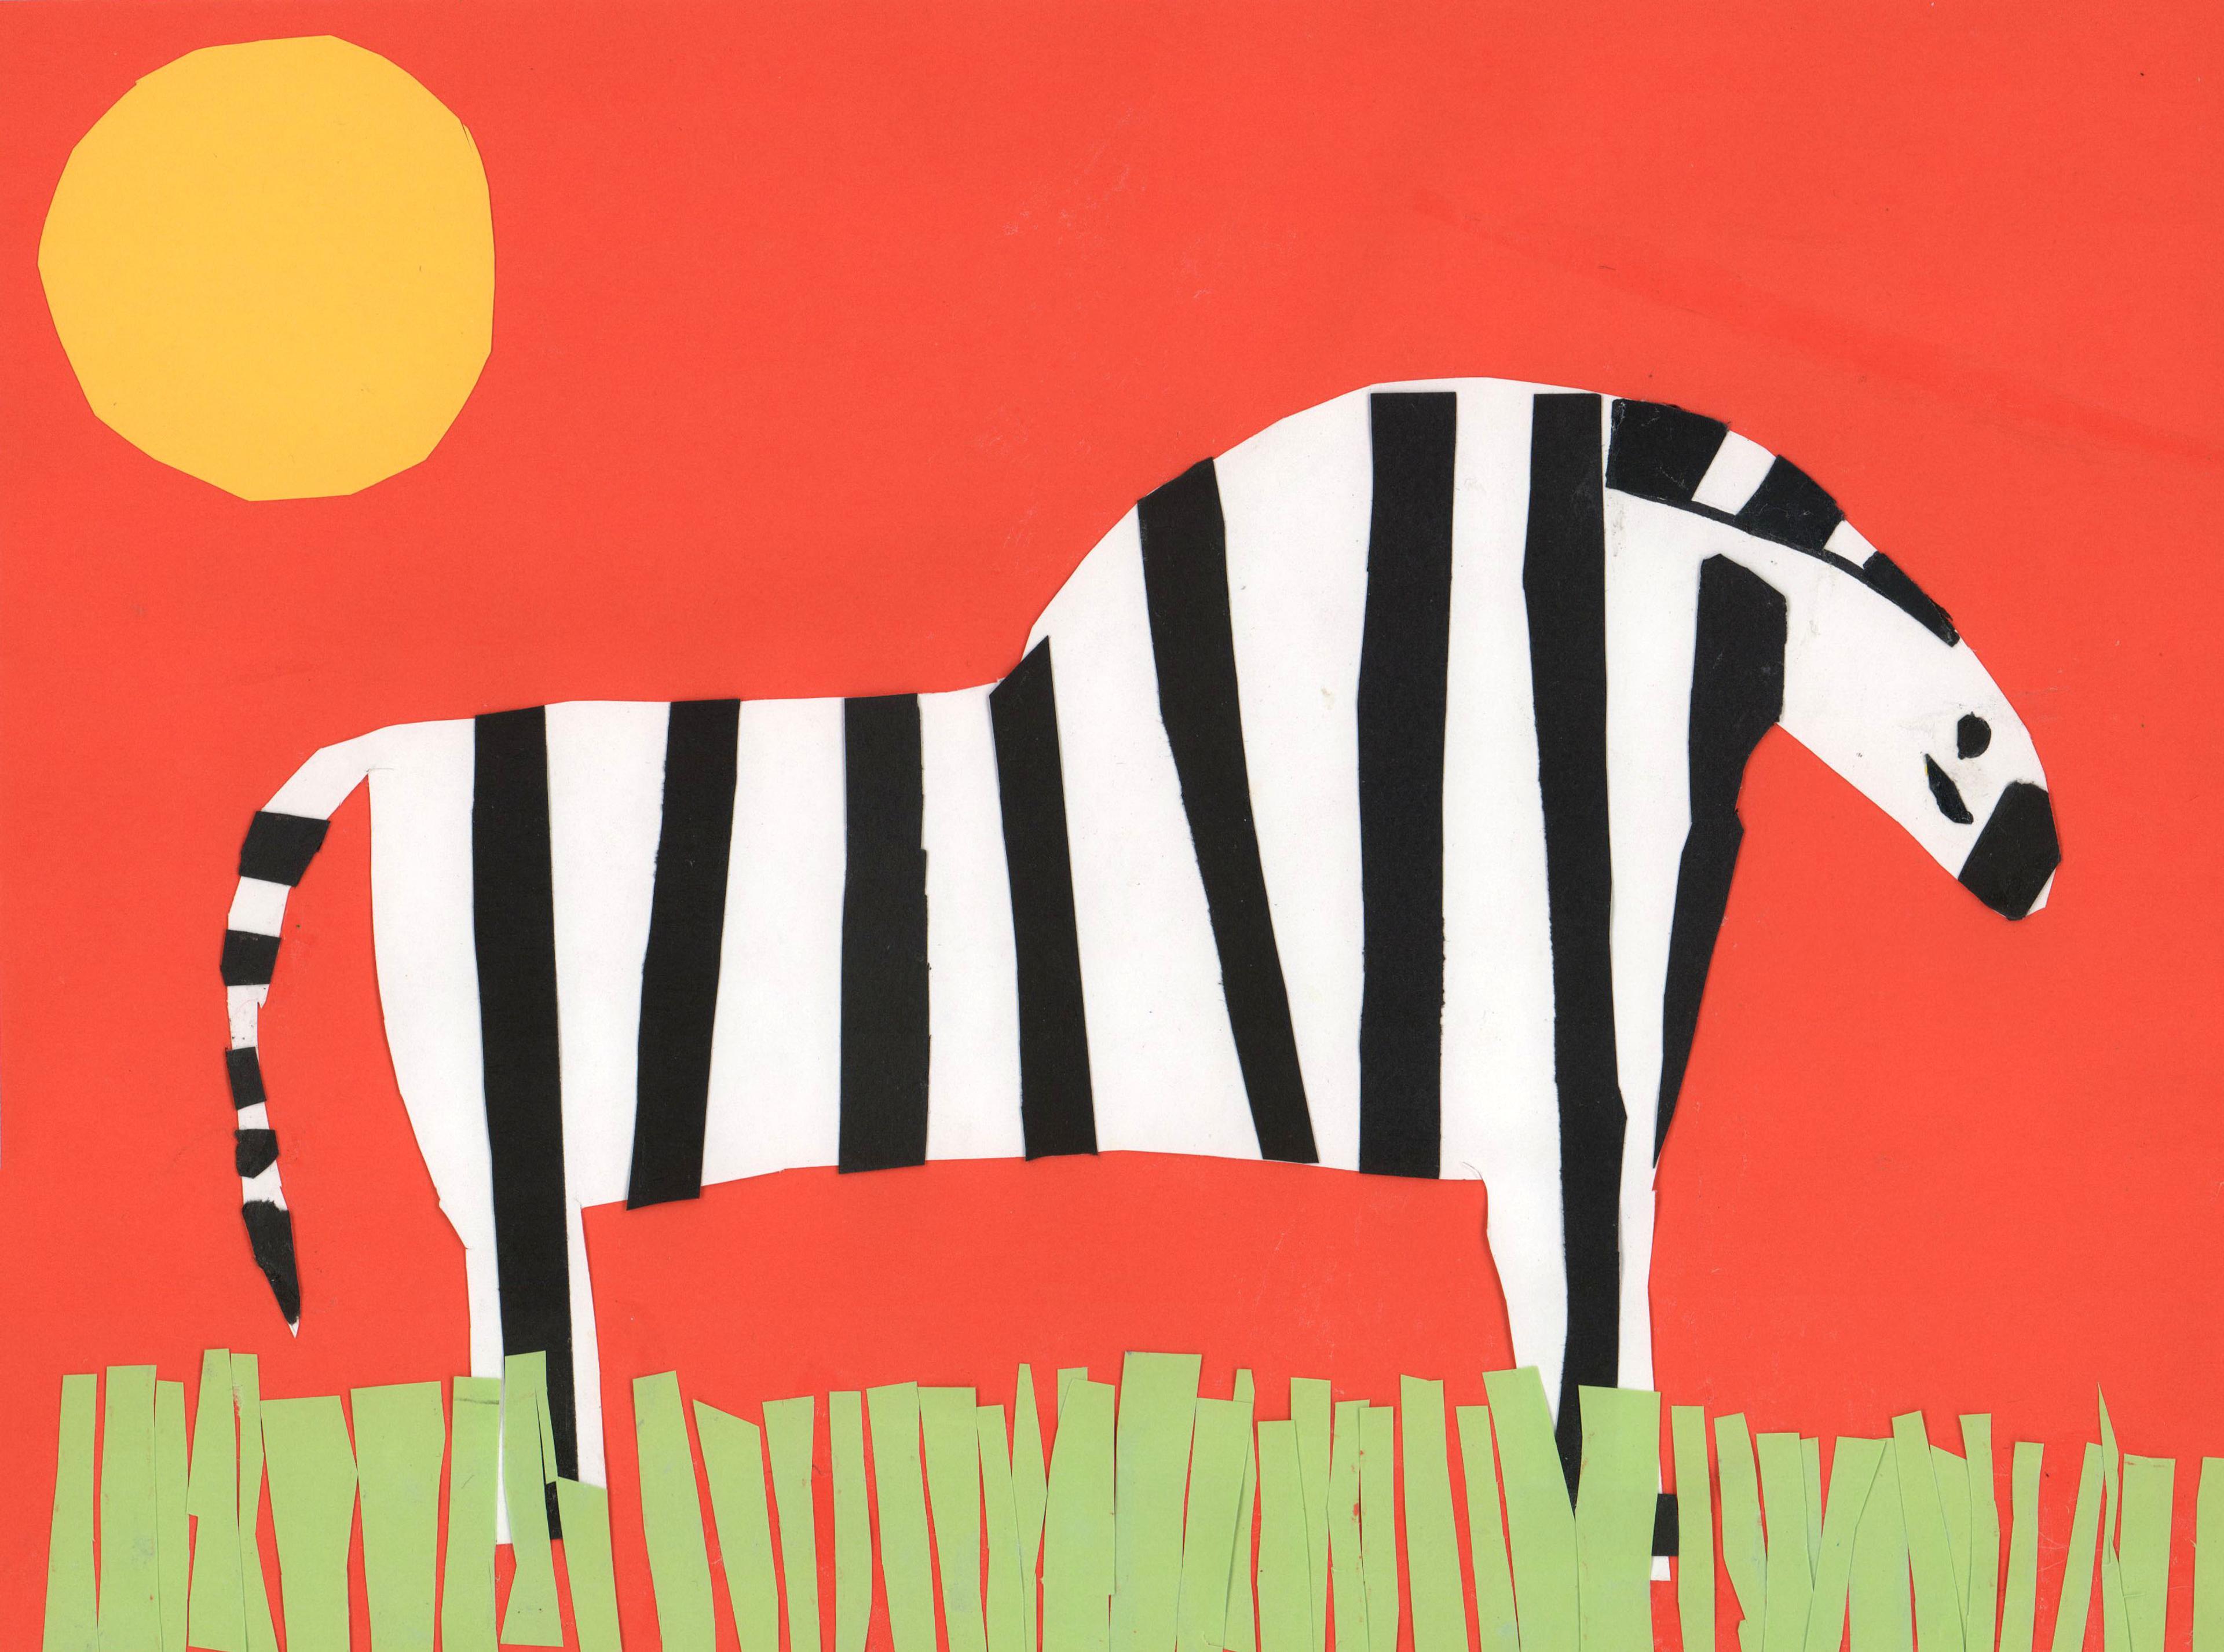 Collage illustration of a black-and-white striped zebra created with construction paper and glue. The zebra is facing right and standing in tall green grass in front of a red sky. A large yellow sun appears in the top left corner of the image.